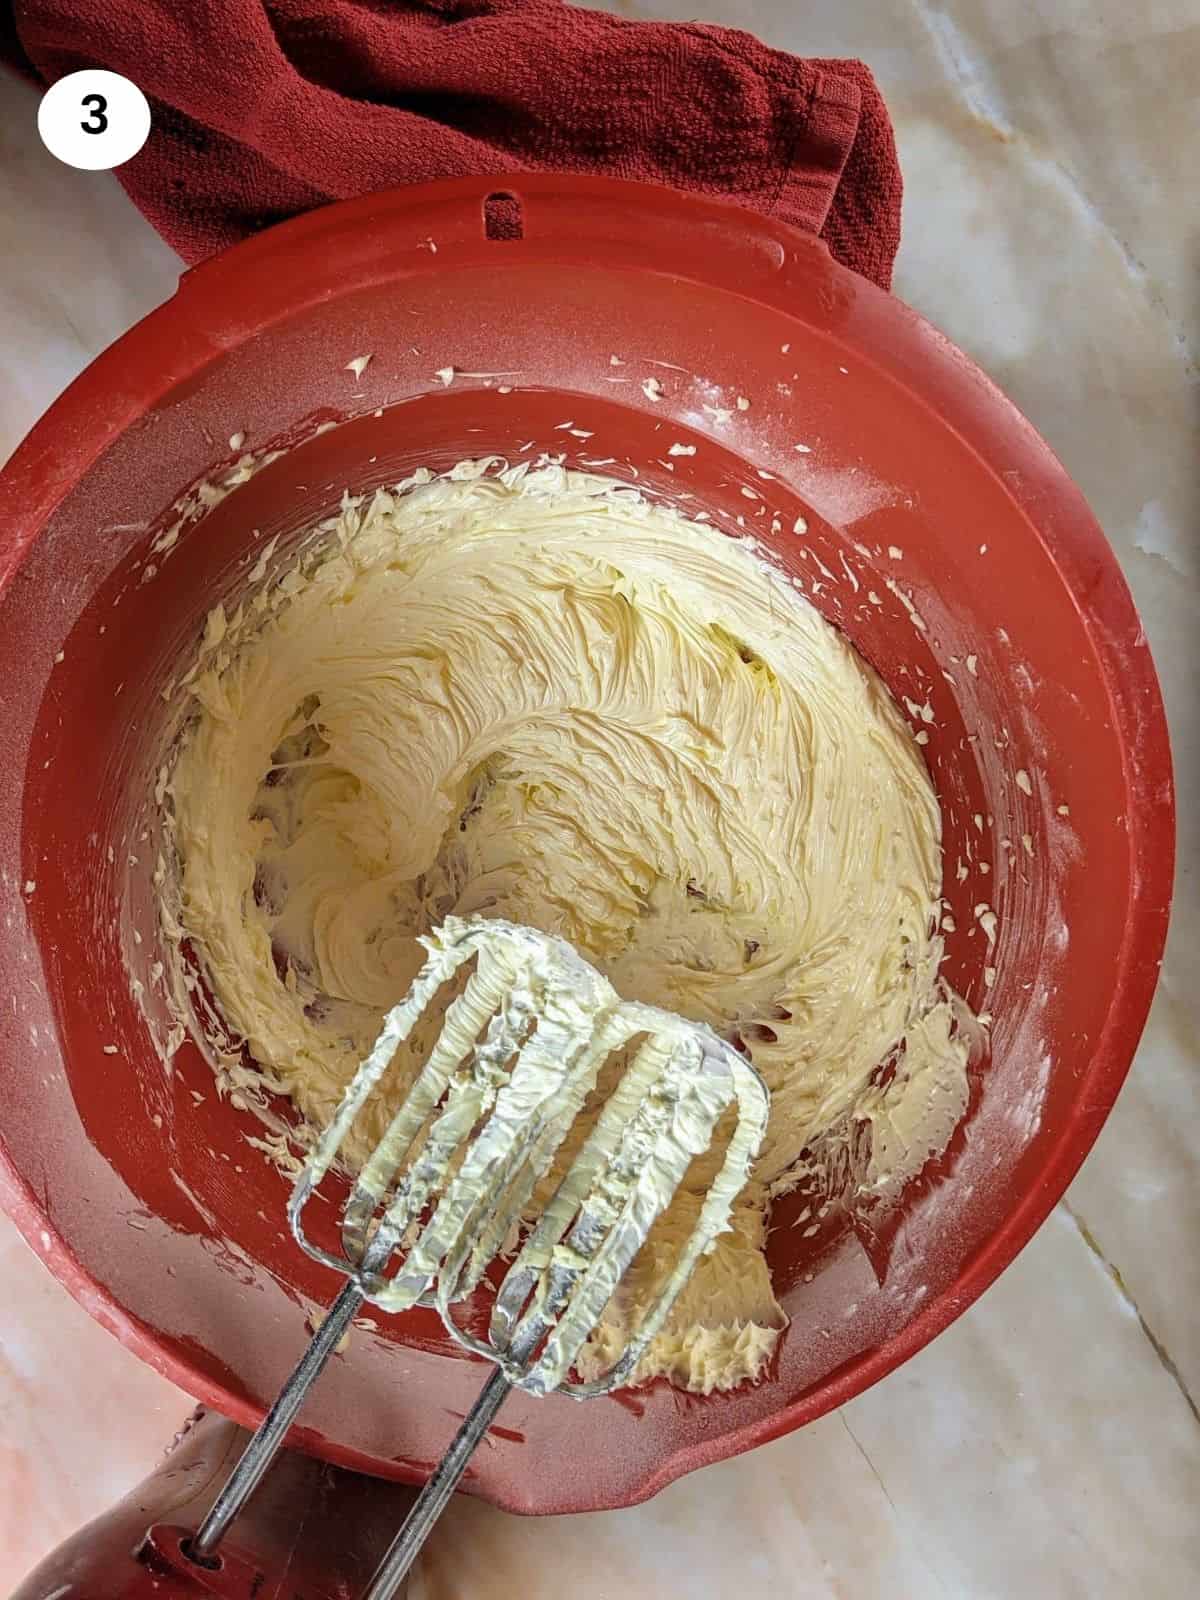 Mixing butter and sugar until light and fluffy.